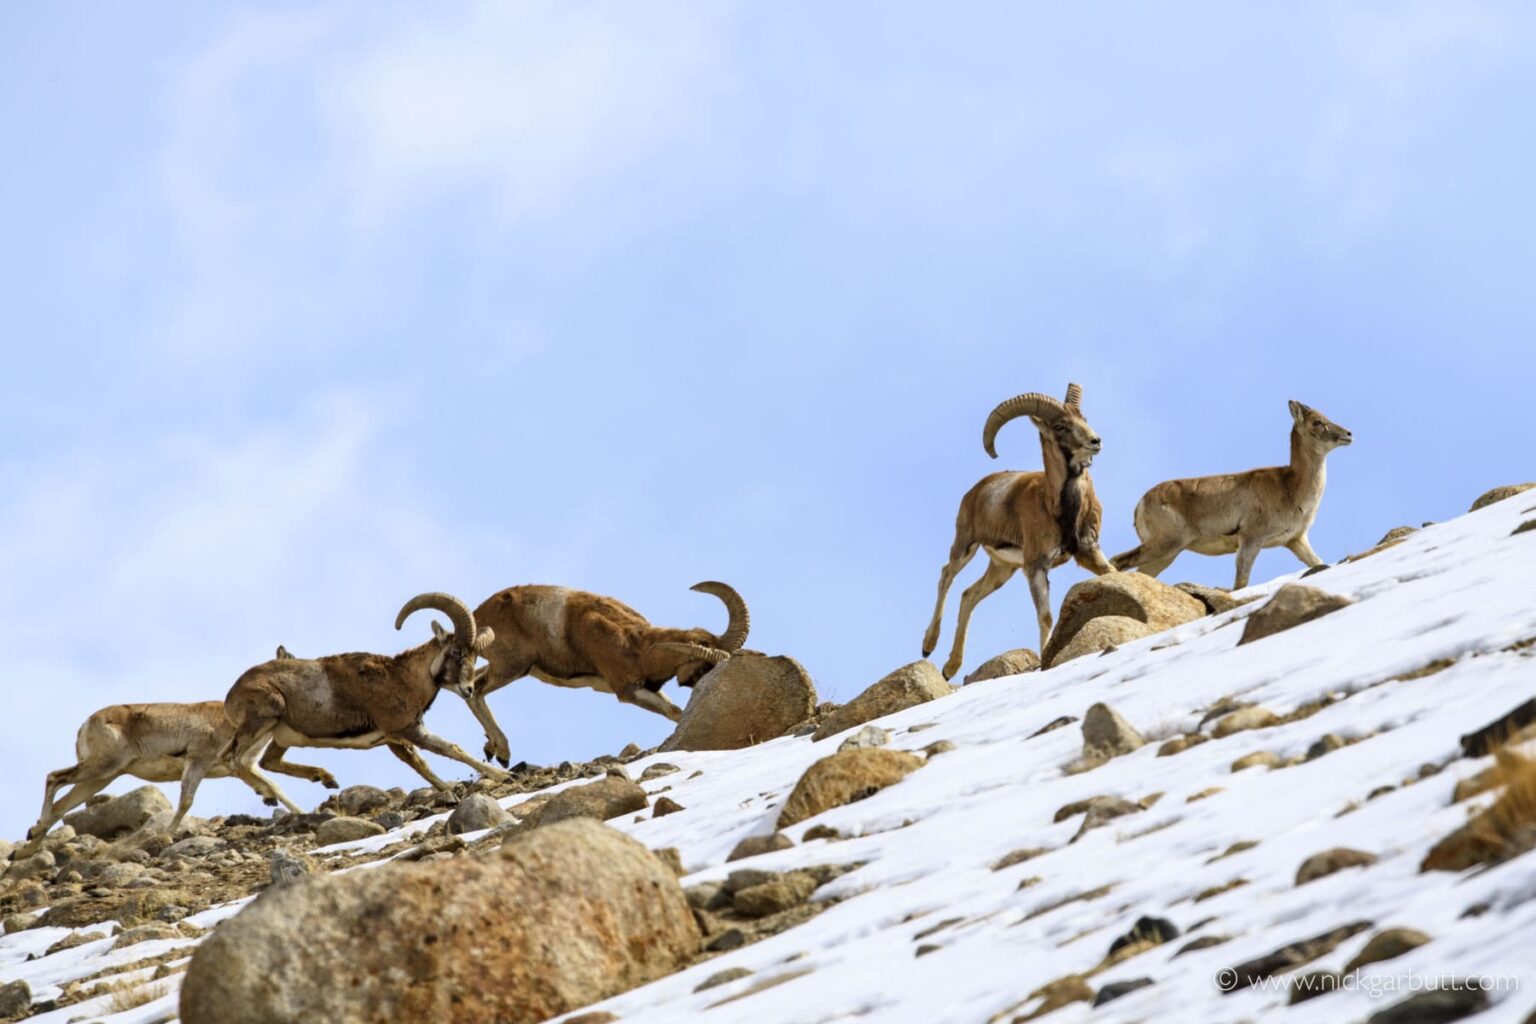 ibex posing on a mountainside in the snow